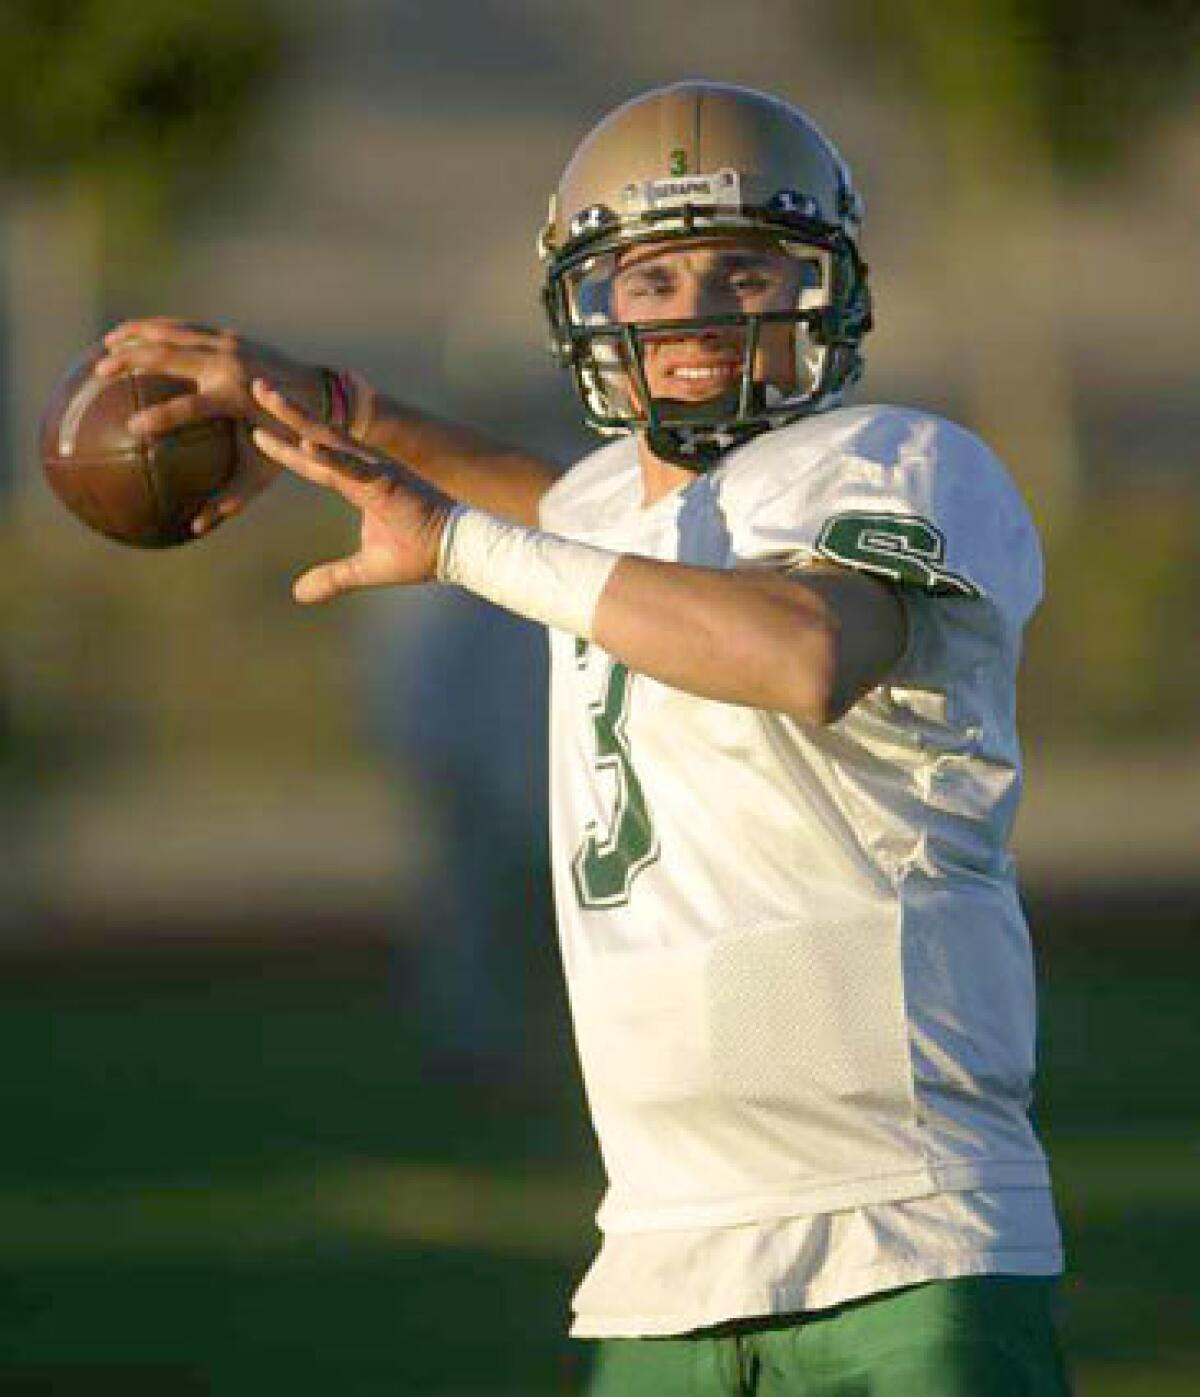 St. Bonaventure's Casey Serna switched from wide receiver to quarterback during the Seraphs' off week last October.